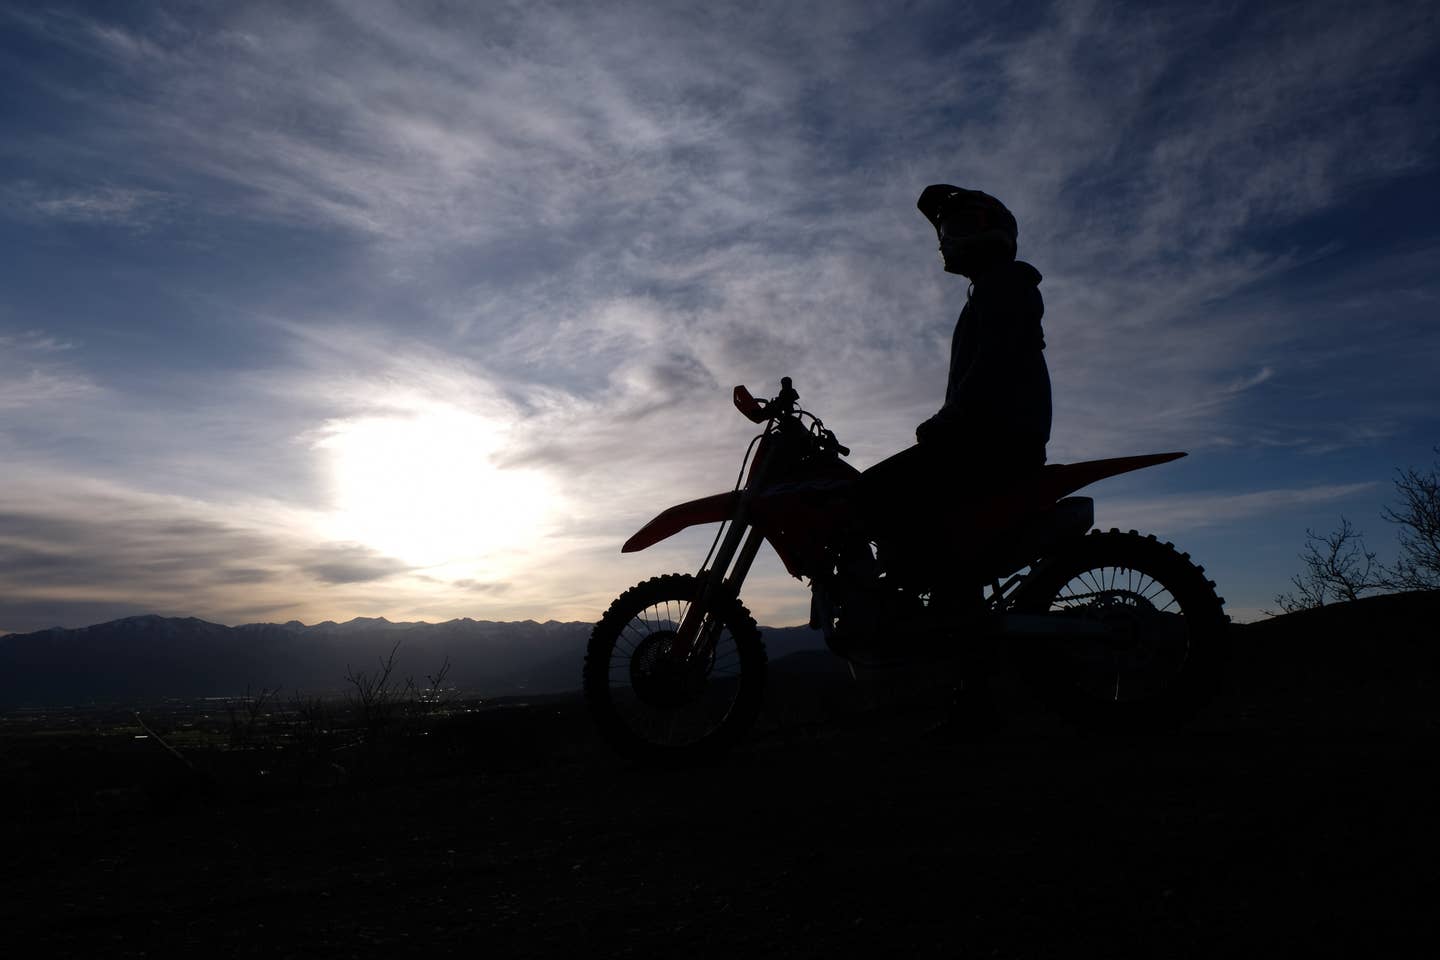 The author on the CRF450RX at dusk.